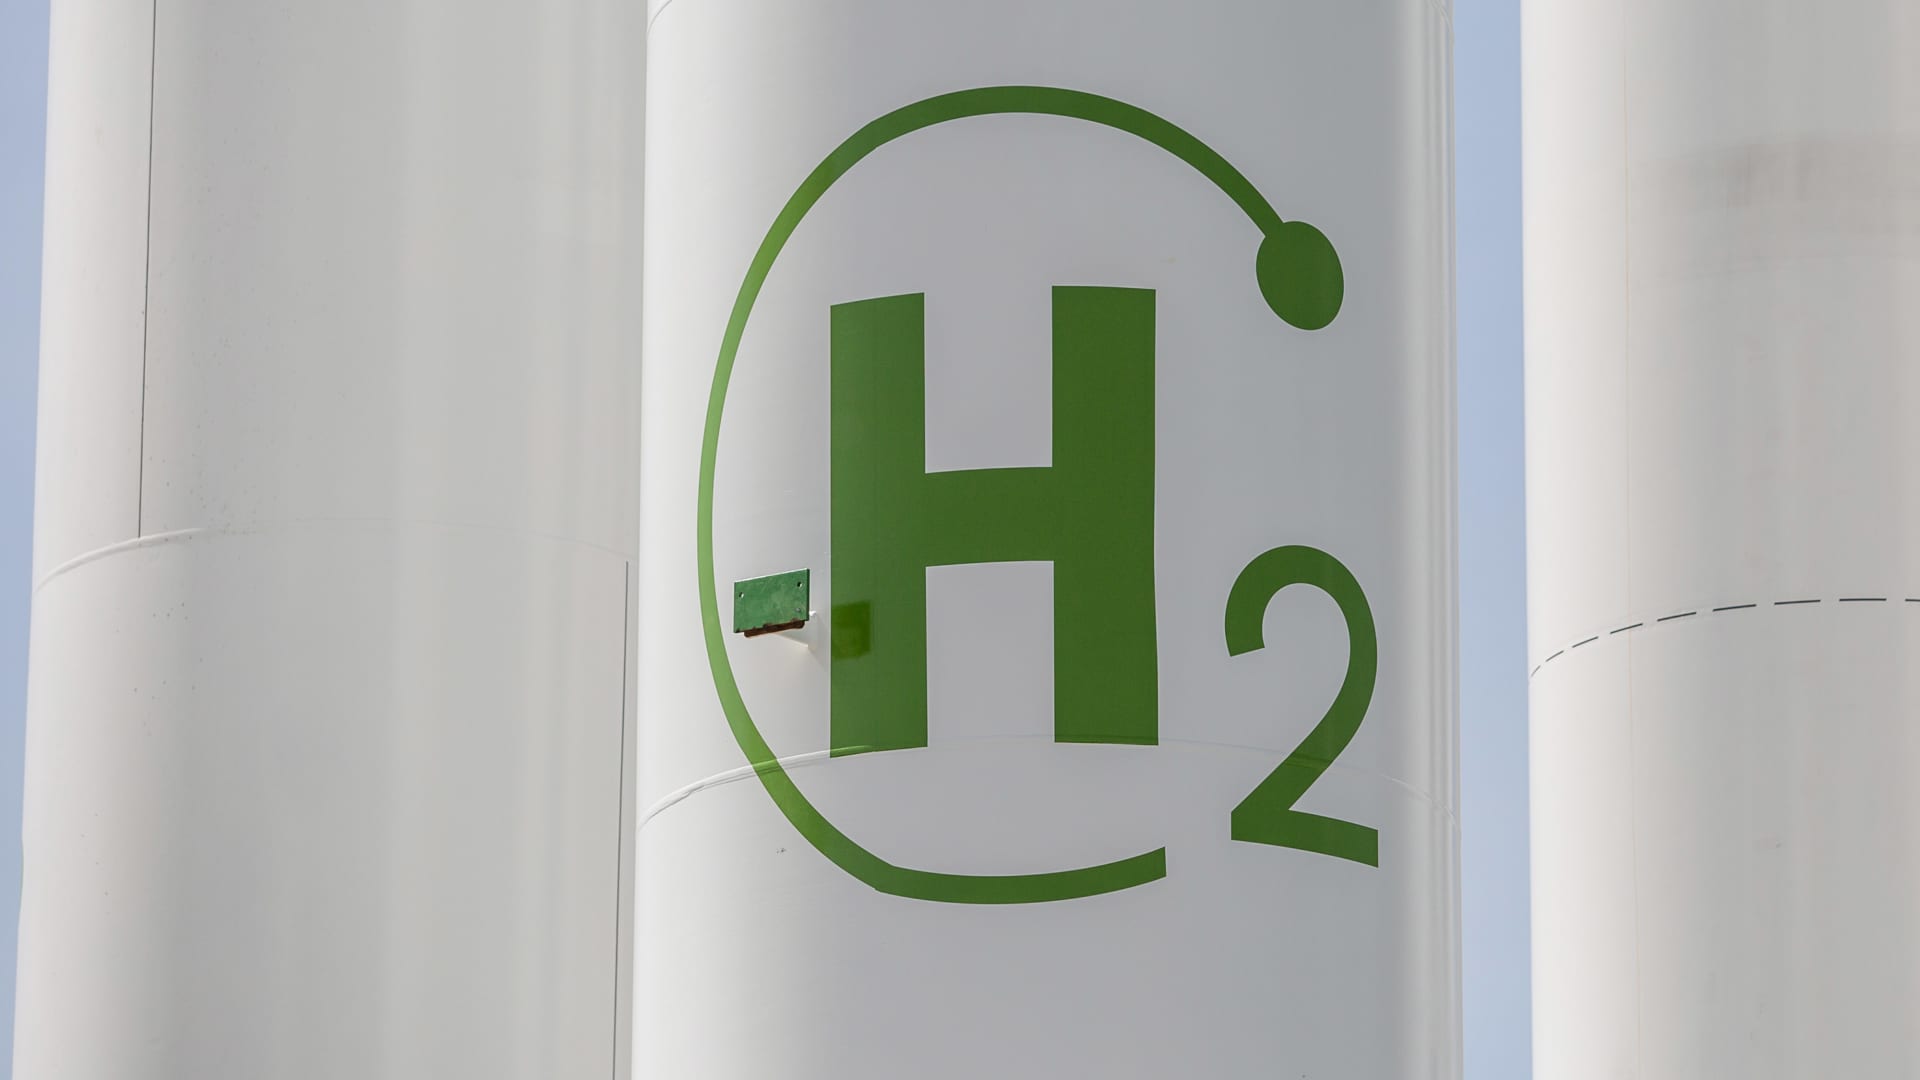 In Australia, firms plan 'super hub' to produce green hydrogen using wind and solar